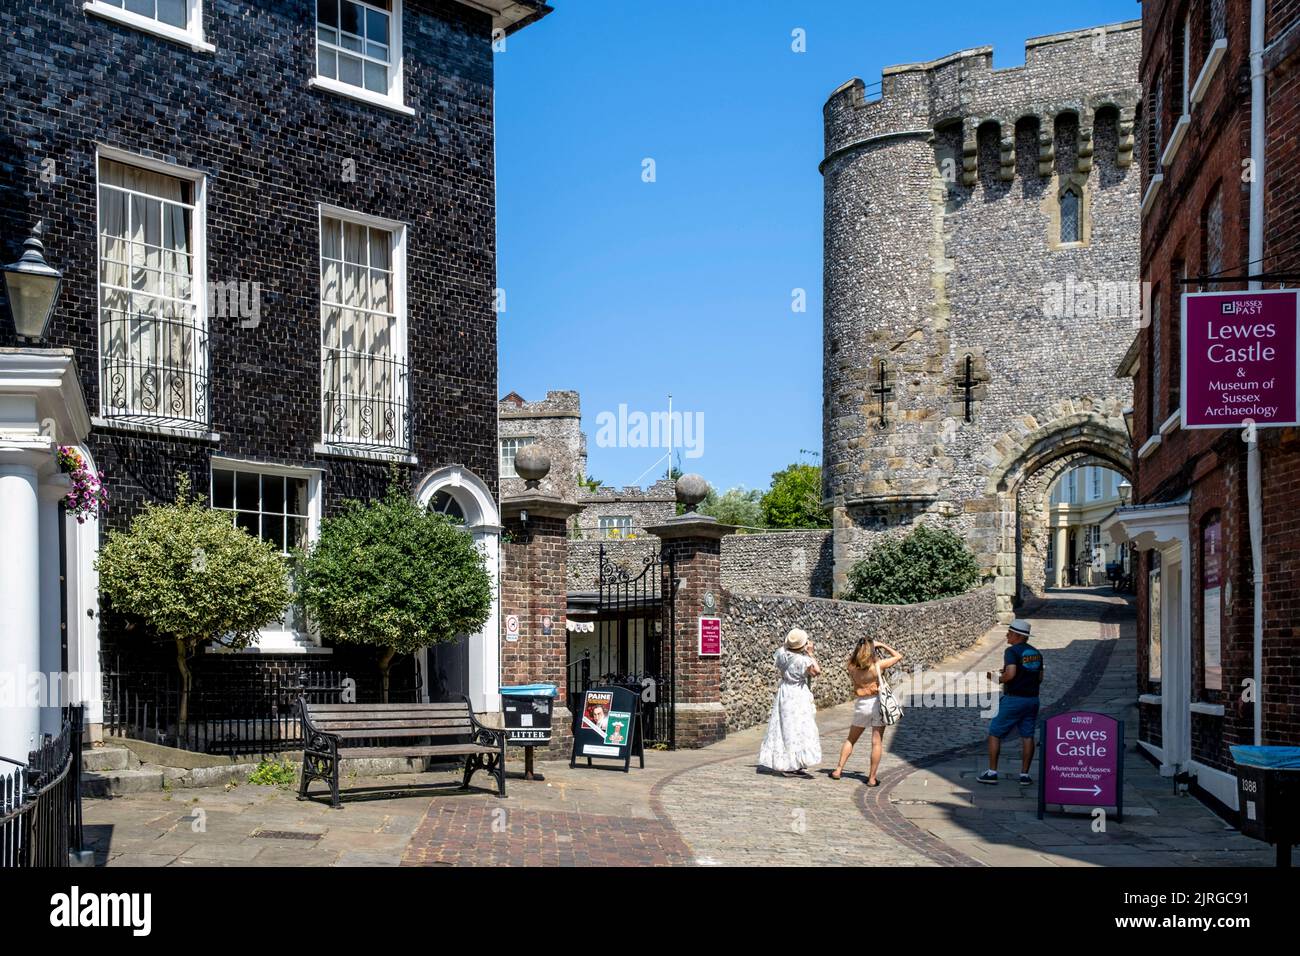 People Visiting Lewes Castle and Museum, Lewes, East Sussex, UK. Stock Photo